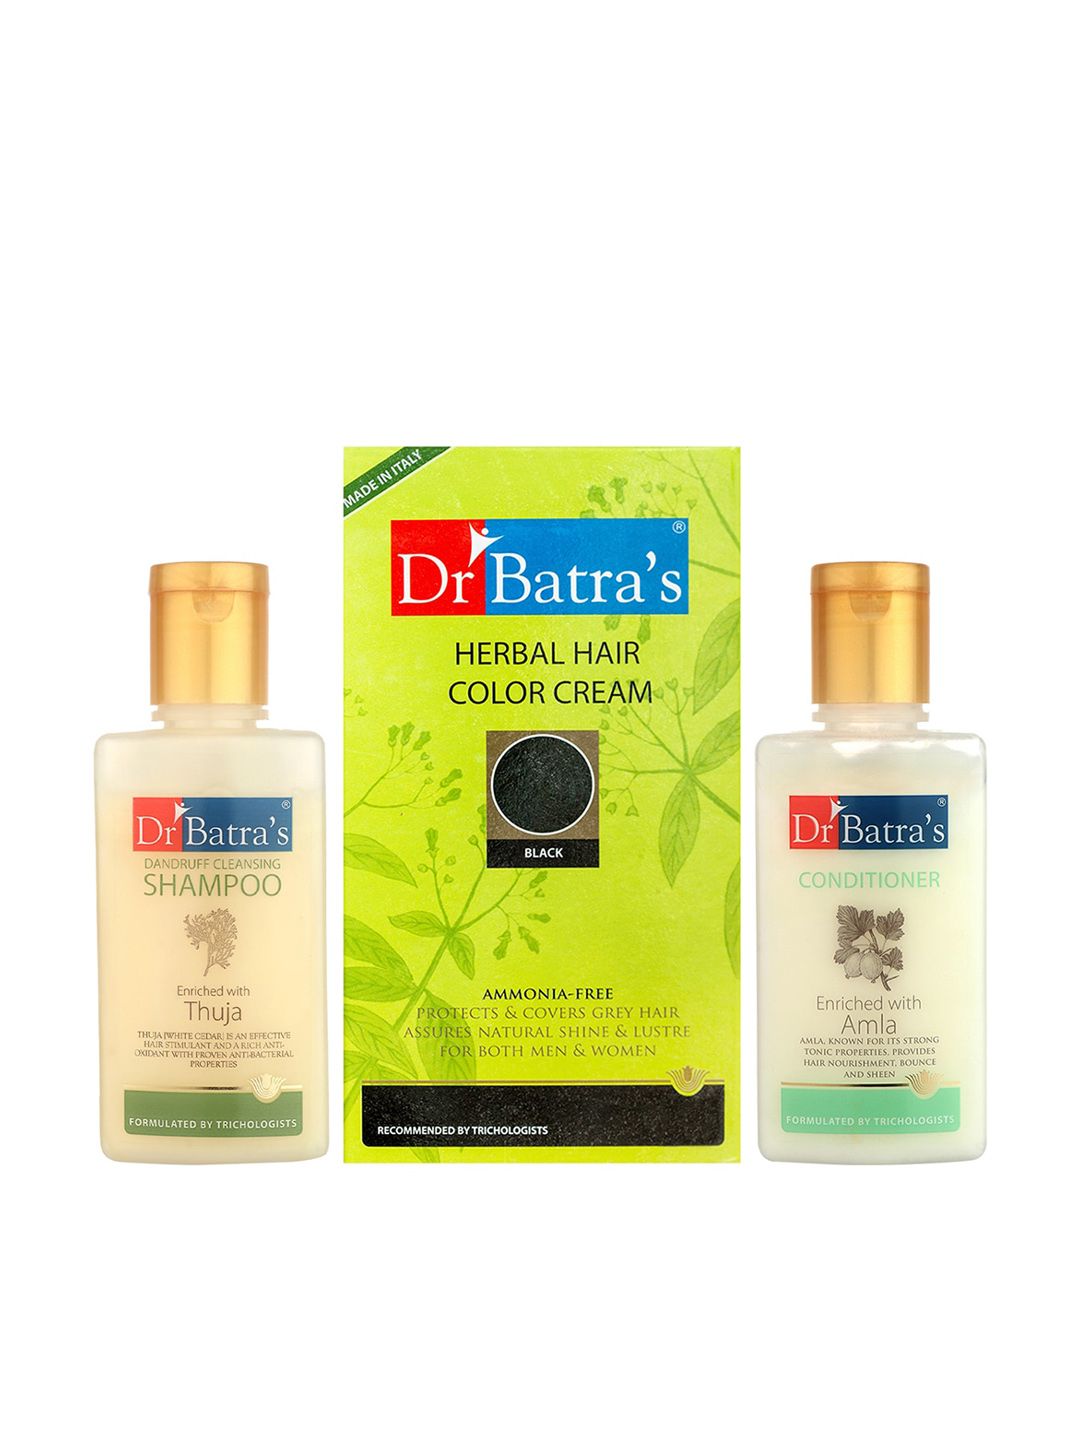 Dr. Batras Unisex Herbal Hair Color Cream, Dandruff Cleansing Shampoo & Conditioner 330 ml Price in India